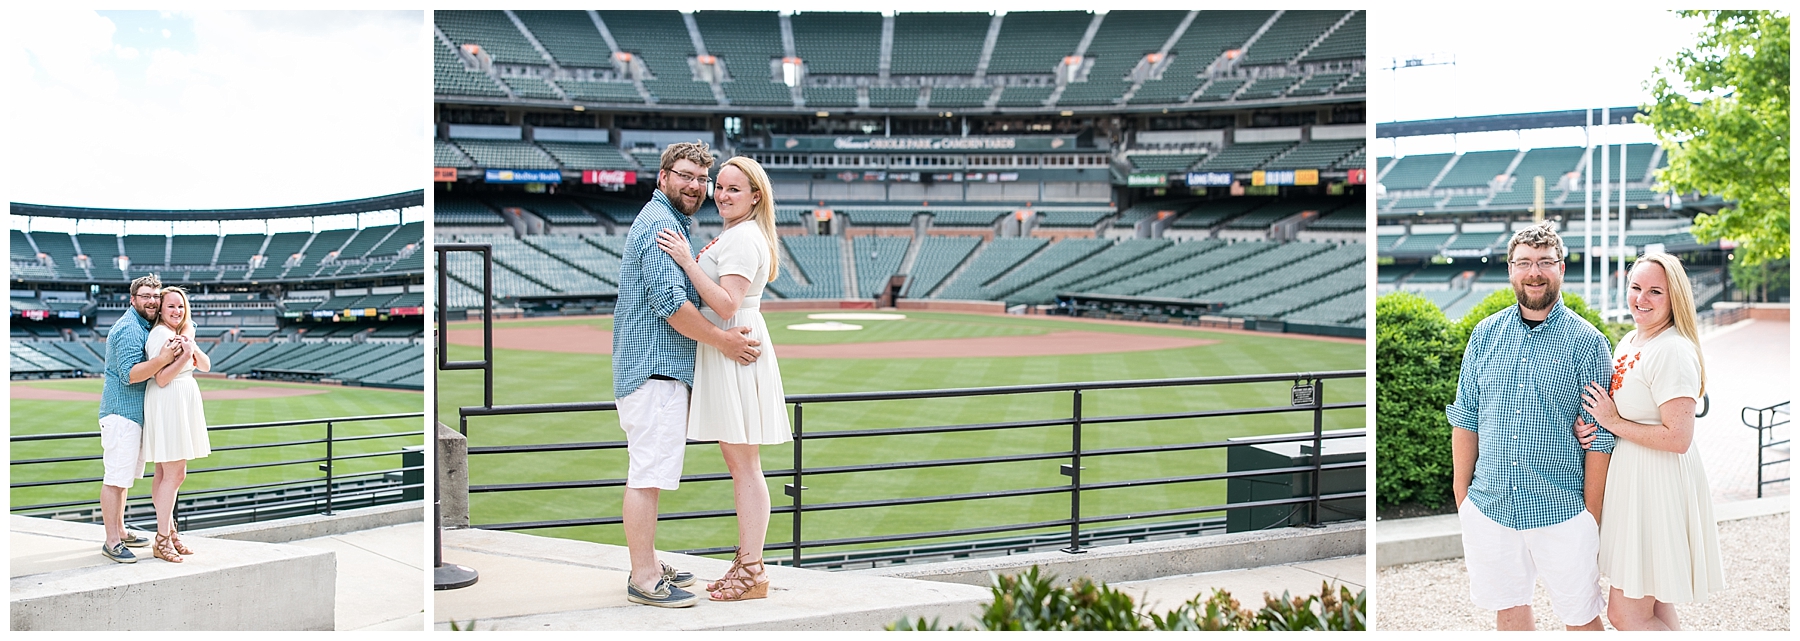 Tess Ray Camden Yards Engagement Session Living Radiant Photography photos_0029.jpg